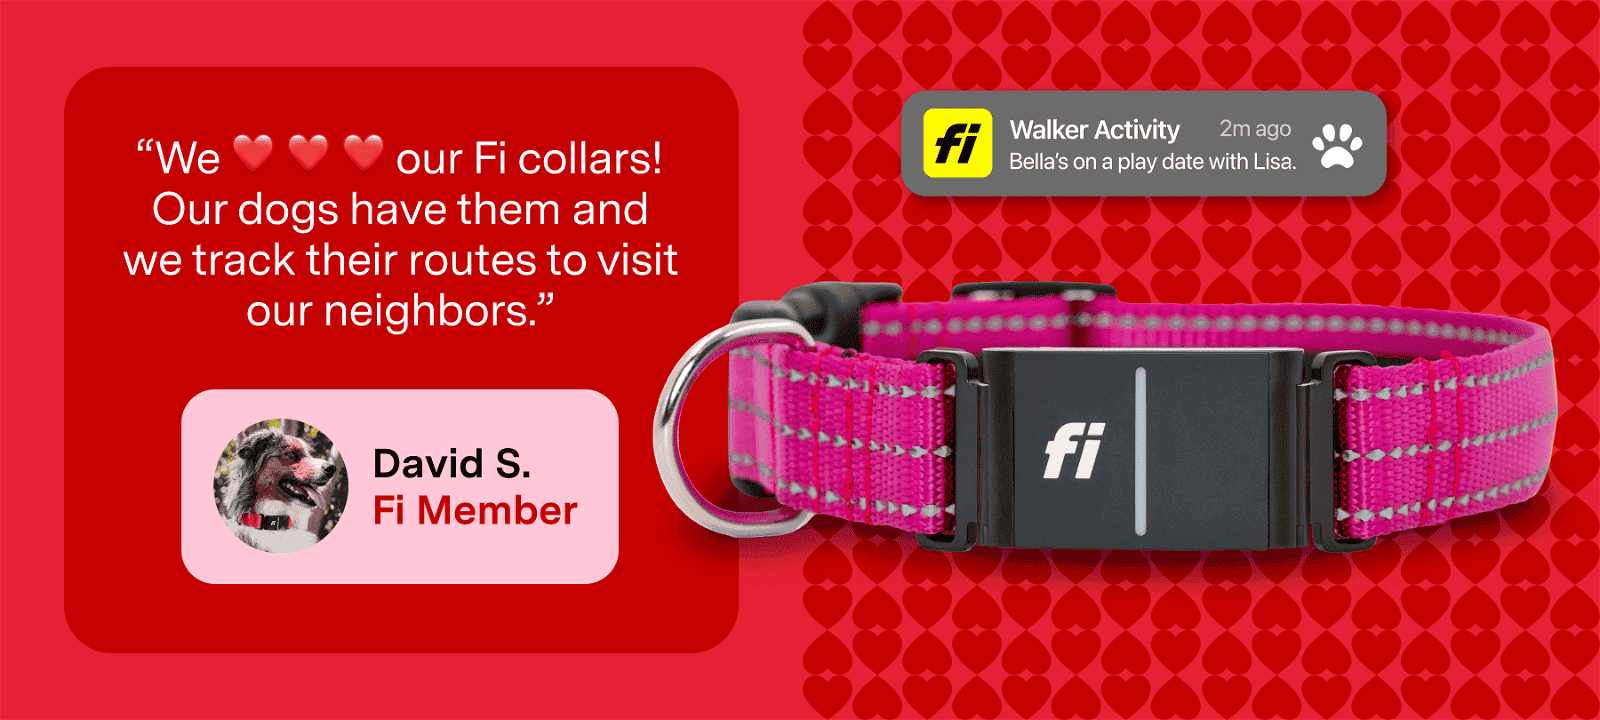 ''We love our Fi collars! Our dogs have them and we track their routes to visit our neighbors.'' - David S. (Fi member)